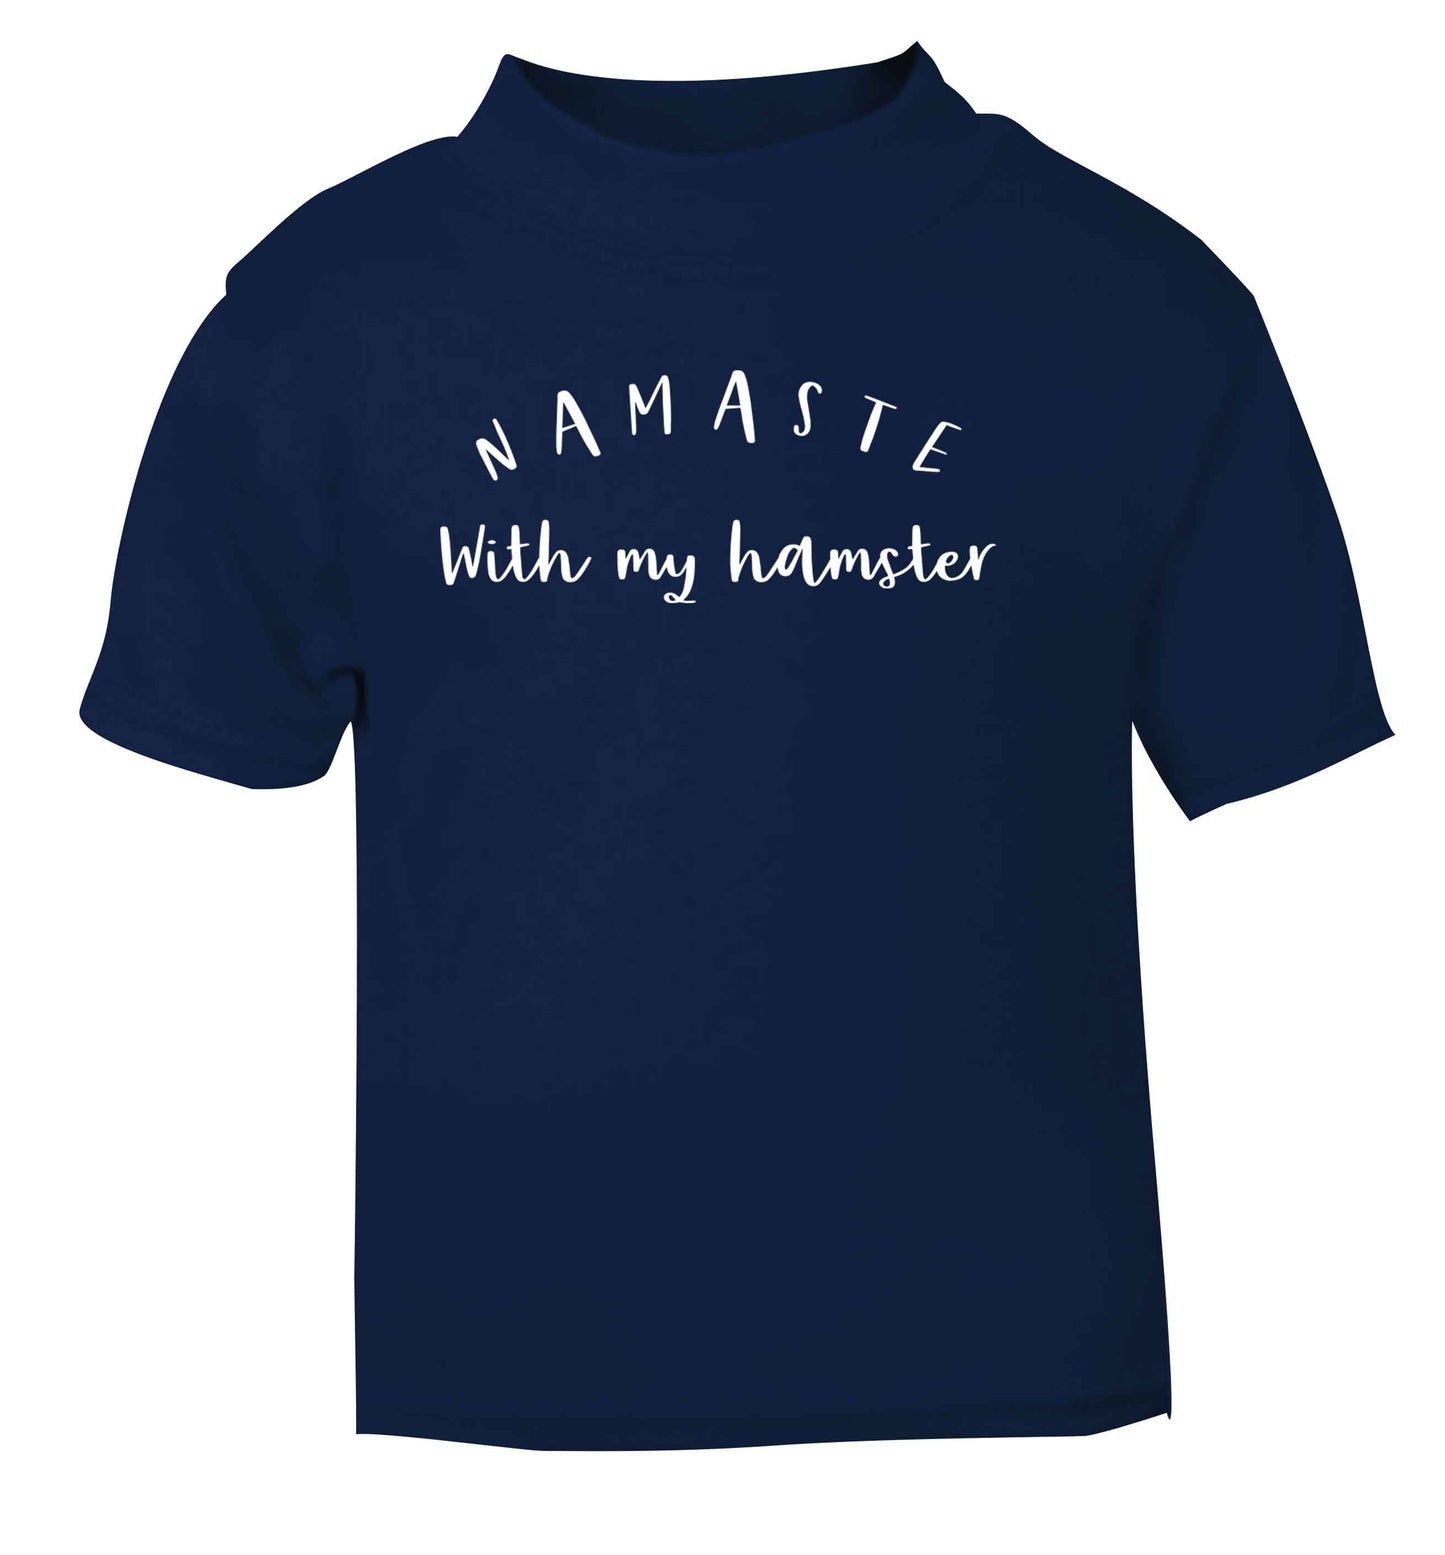 Namaste with my hamster navy Baby Toddler Tshirt 2 Years